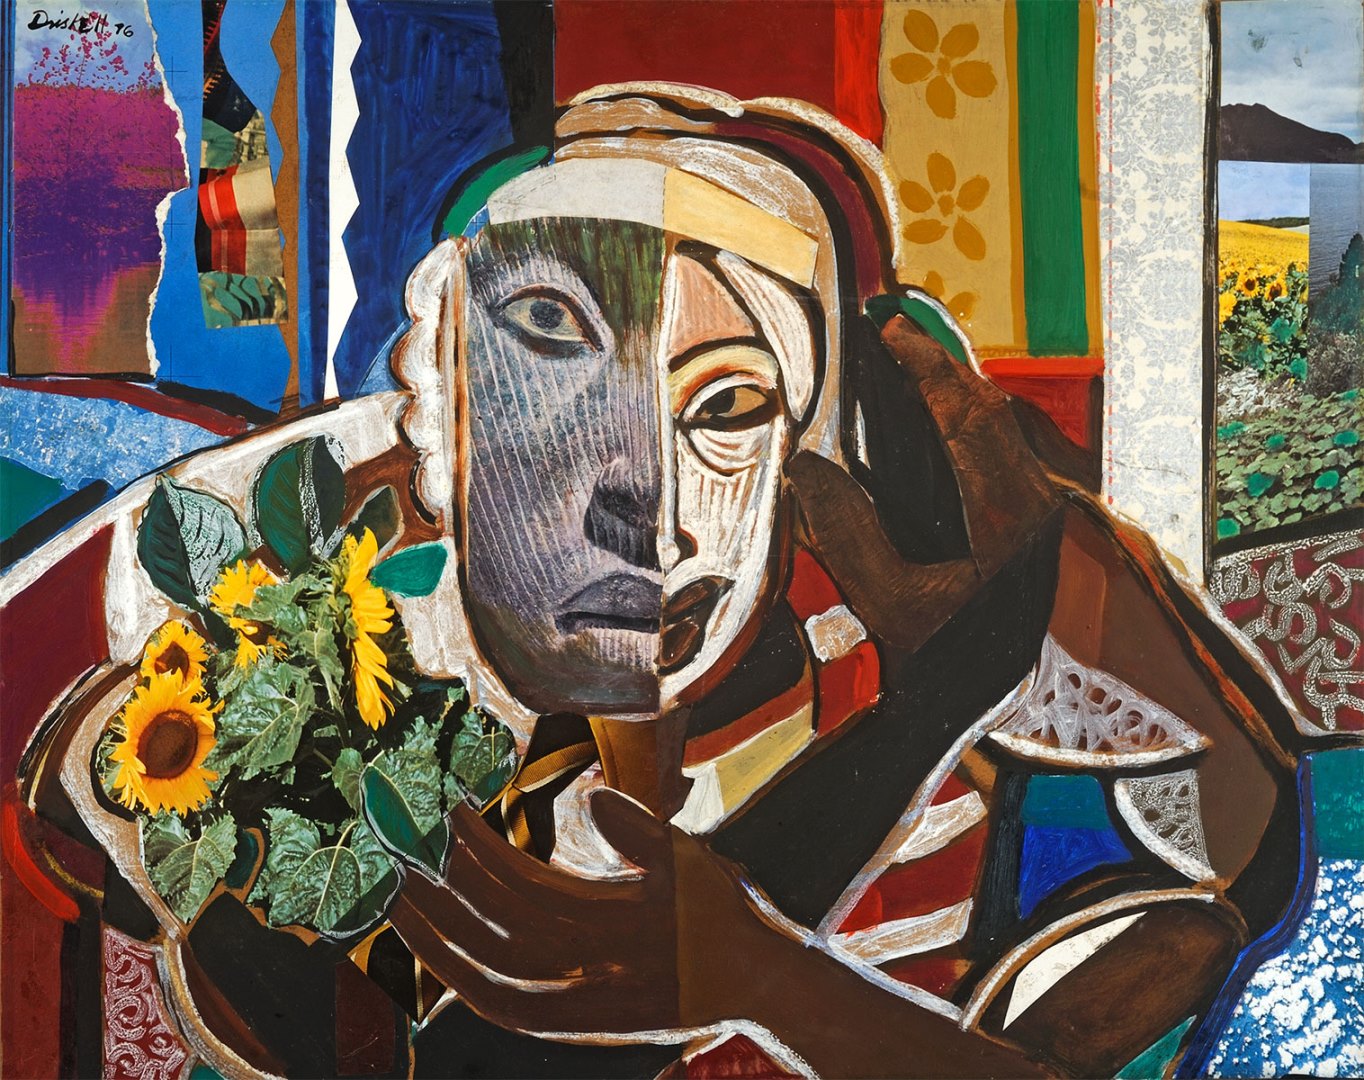 David Driskell’s Icons of Nature and History